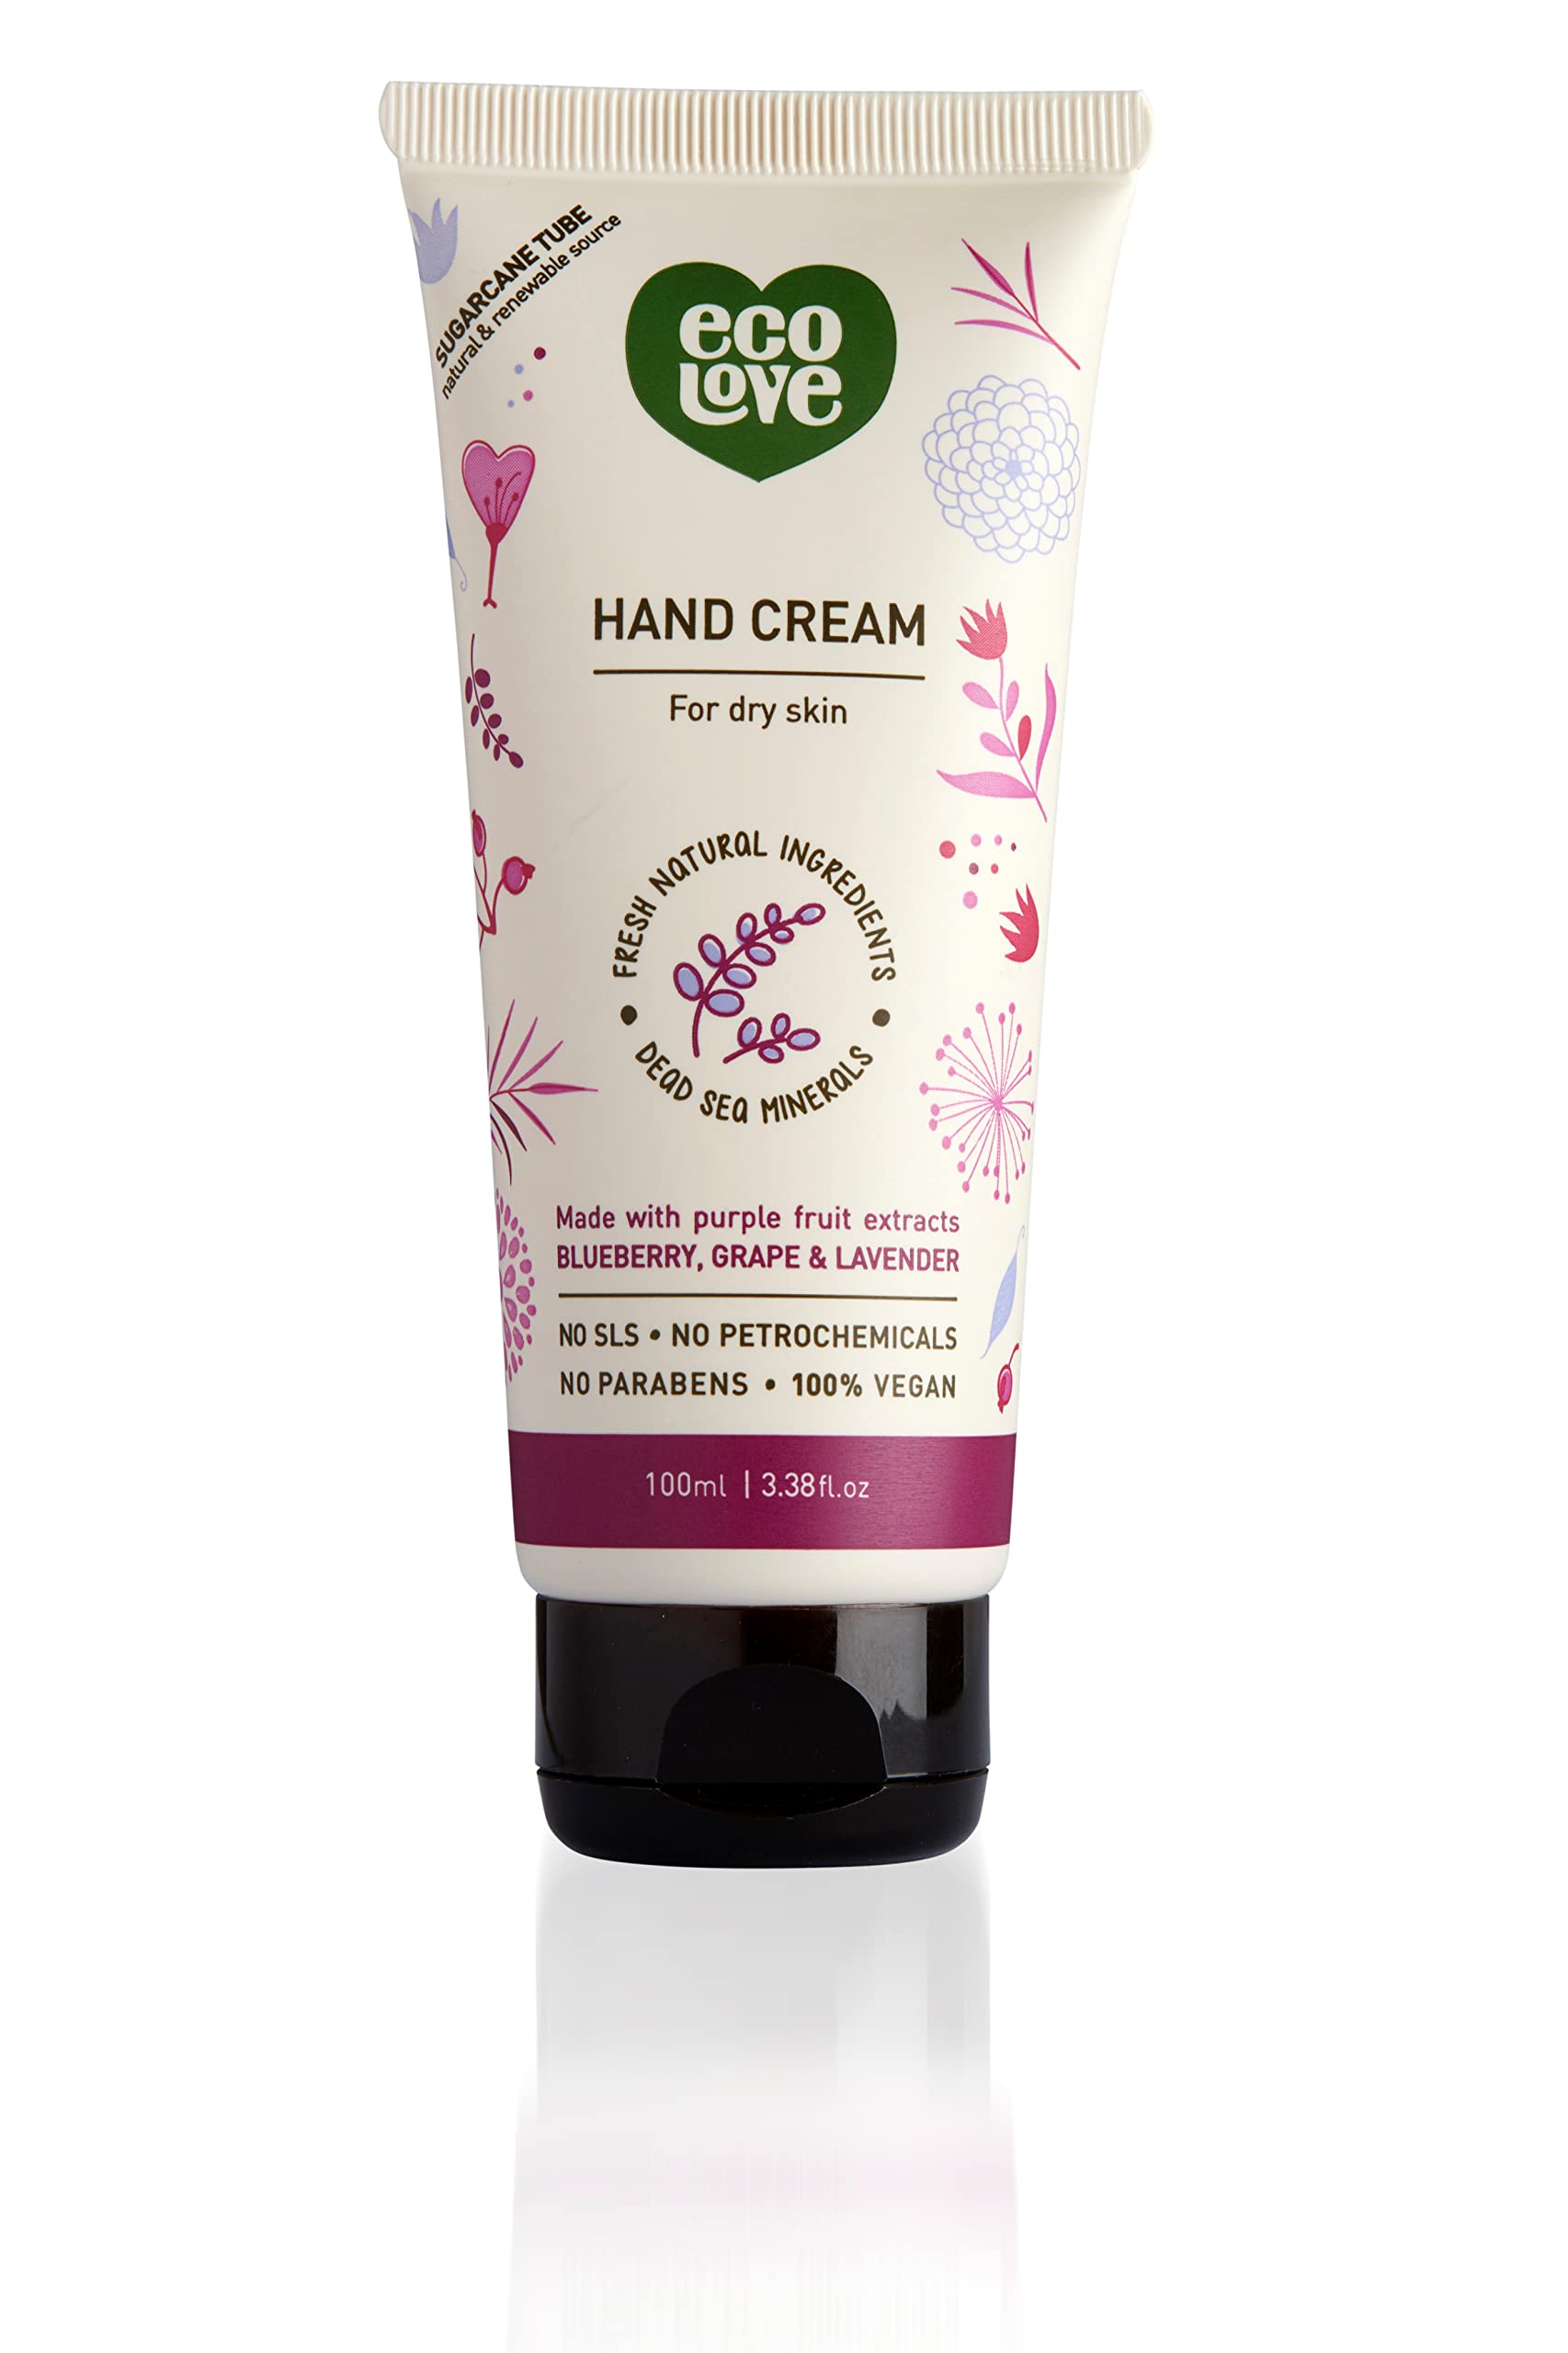 ecoLove - Natural and Organic Moisturizing Hand Cream- Organic Blueberry, Grape & Lavender - Non Greasy Fast Absorbing Vegan Hand Lotion for Dry Skin, 3.38 fl oz